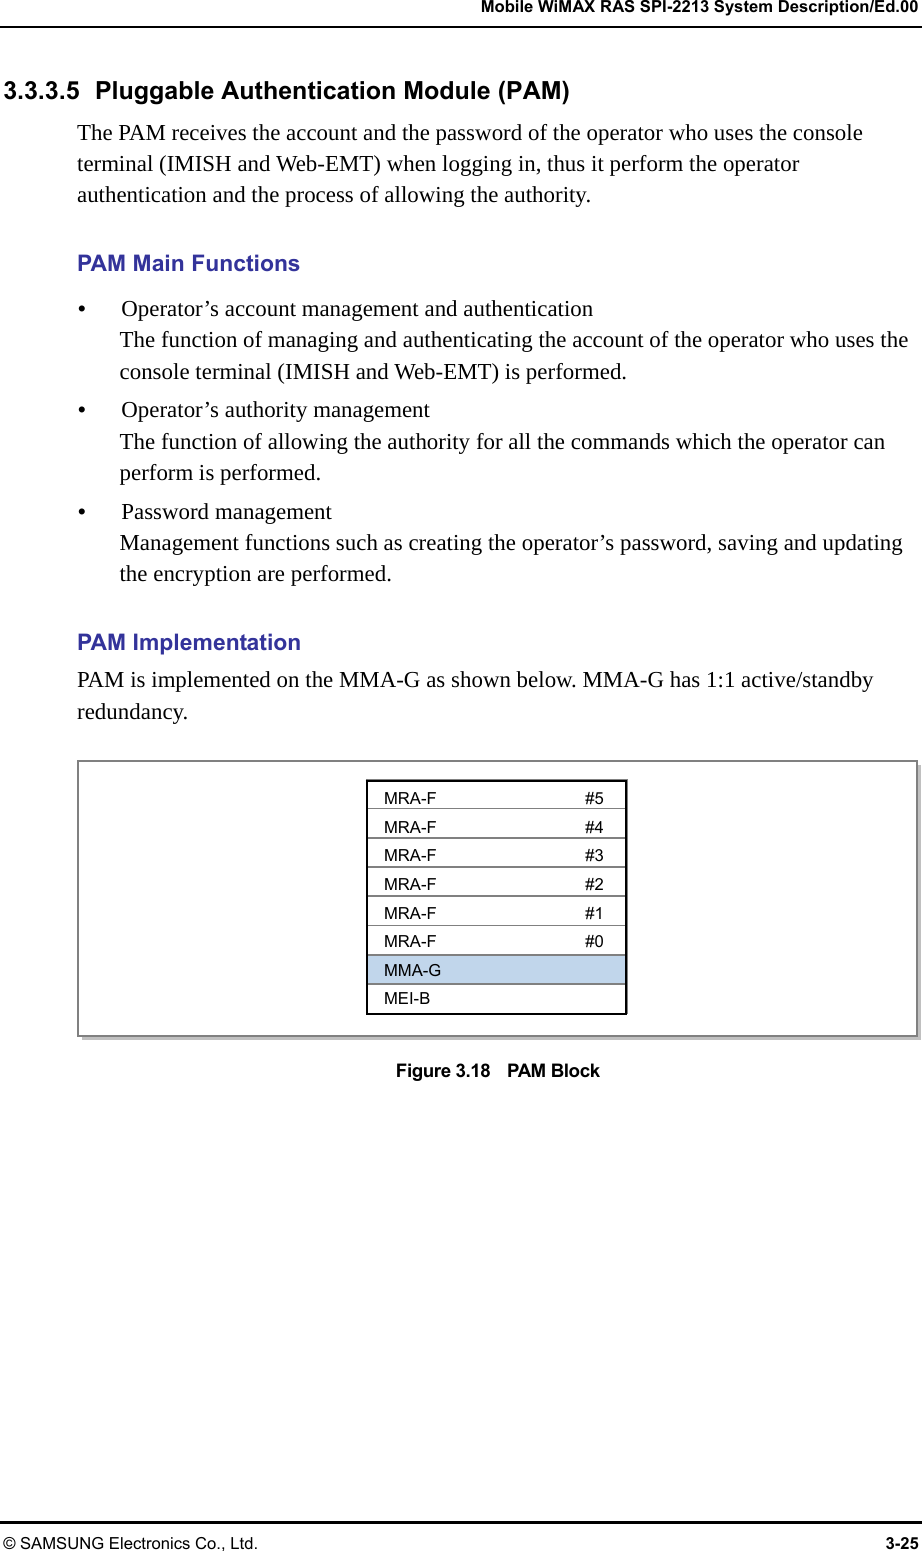   Mobile WiMAX RAS SPI-2213 System Description/Ed.00 © SAMSUNG Electronics Co., Ltd.  3-25 3.3.3.5 Pluggable Authentication Module (PAM) The PAM receives the account and the password of the operator who uses the console terminal (IMISH and Web-EMT) when logging in, thus it perform the operator authentication and the process of allowing the authority.  PAM Main Functions y Operator’s account management and authentication The function of managing and authenticating the account of the operator who uses the console terminal (IMISH and Web-EMT) is performed. y Operator’s authority management The function of allowing the authority for all the commands which the operator can perform is performed. y Password management Management functions such as creating the operator’s password, saving and updating the encryption are performed.  PAM Implementation PAM is implemented on the MMA-G as shown below. MMA-G has 1:1 active/standby redundancy.  Figure 3.18    PAM Block  MRA-F #5 MRA-F #4 MRA-F #3 MRA-F #2 MRA-F #1 MRA-F #0 MMA-G MEI-B 